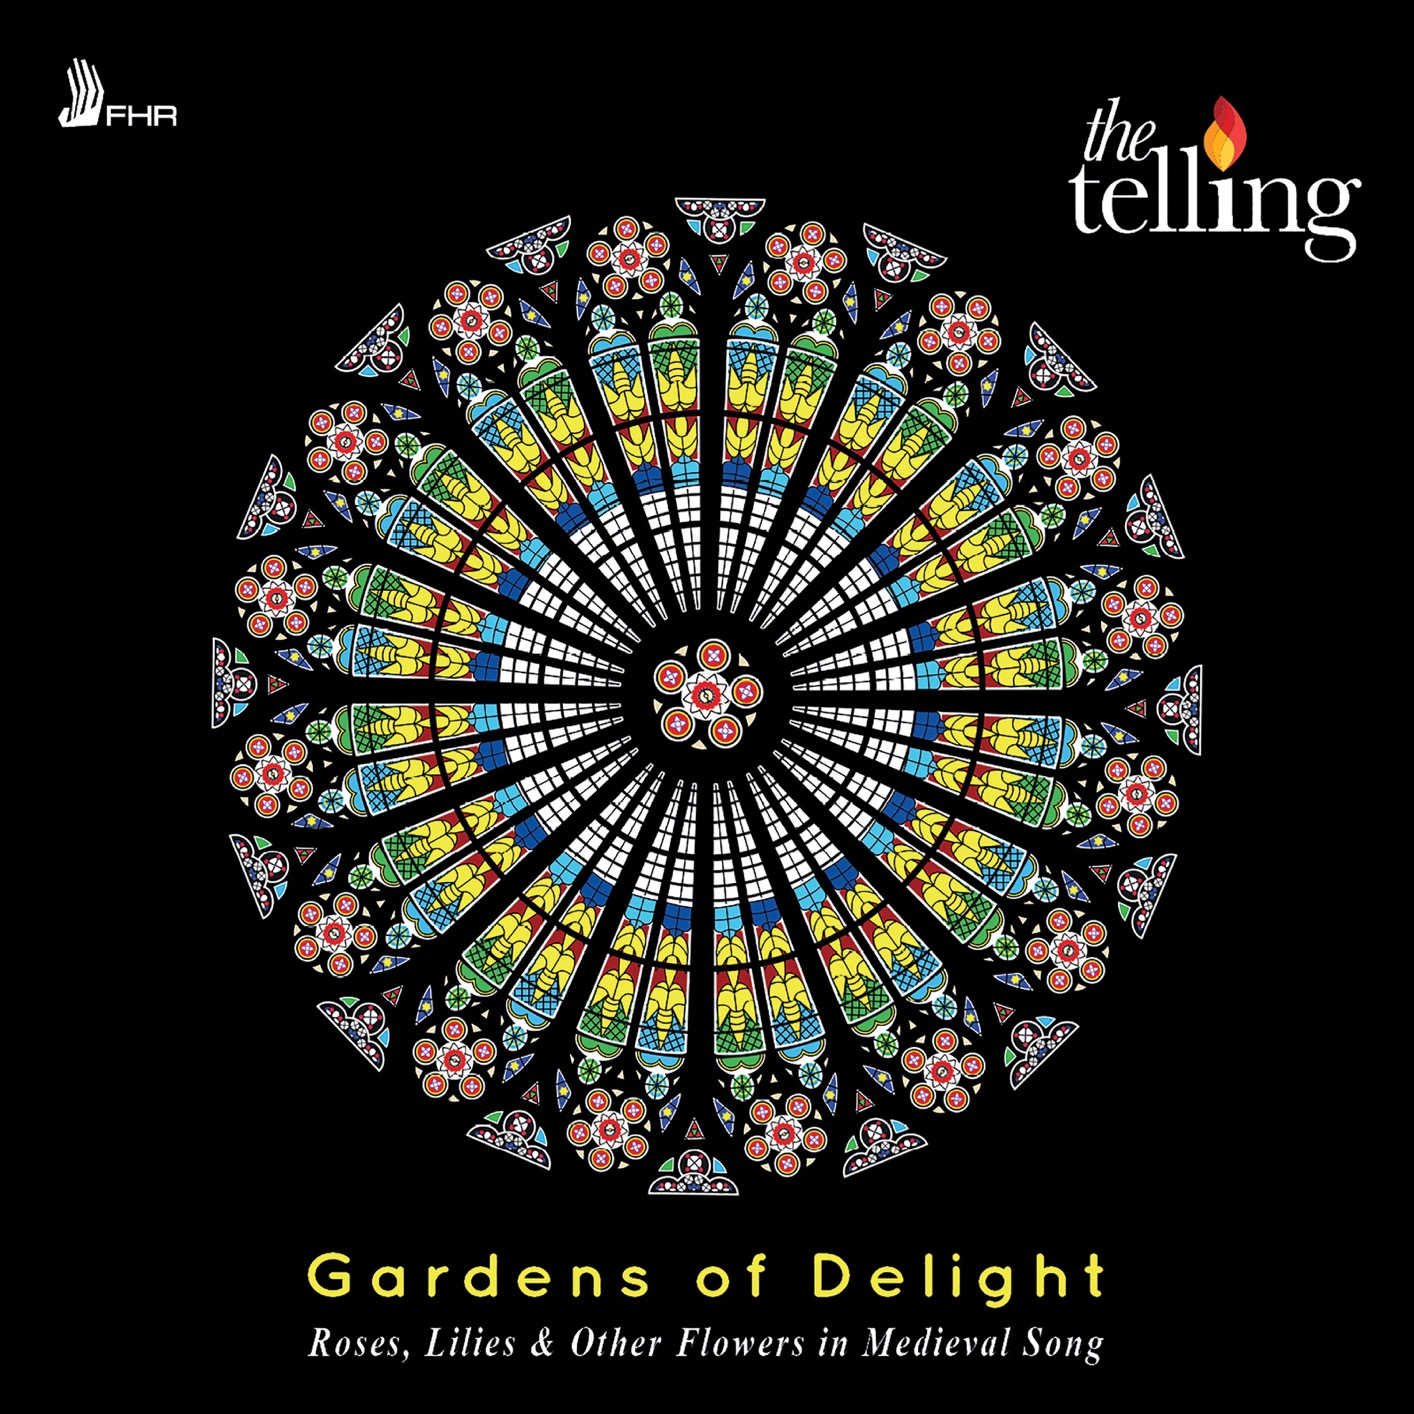 The Telling - Gardens of Delight: Roses, Lilies & Other Flowers in Medieval Song (2019) [FLAC 24bit/96kHz]